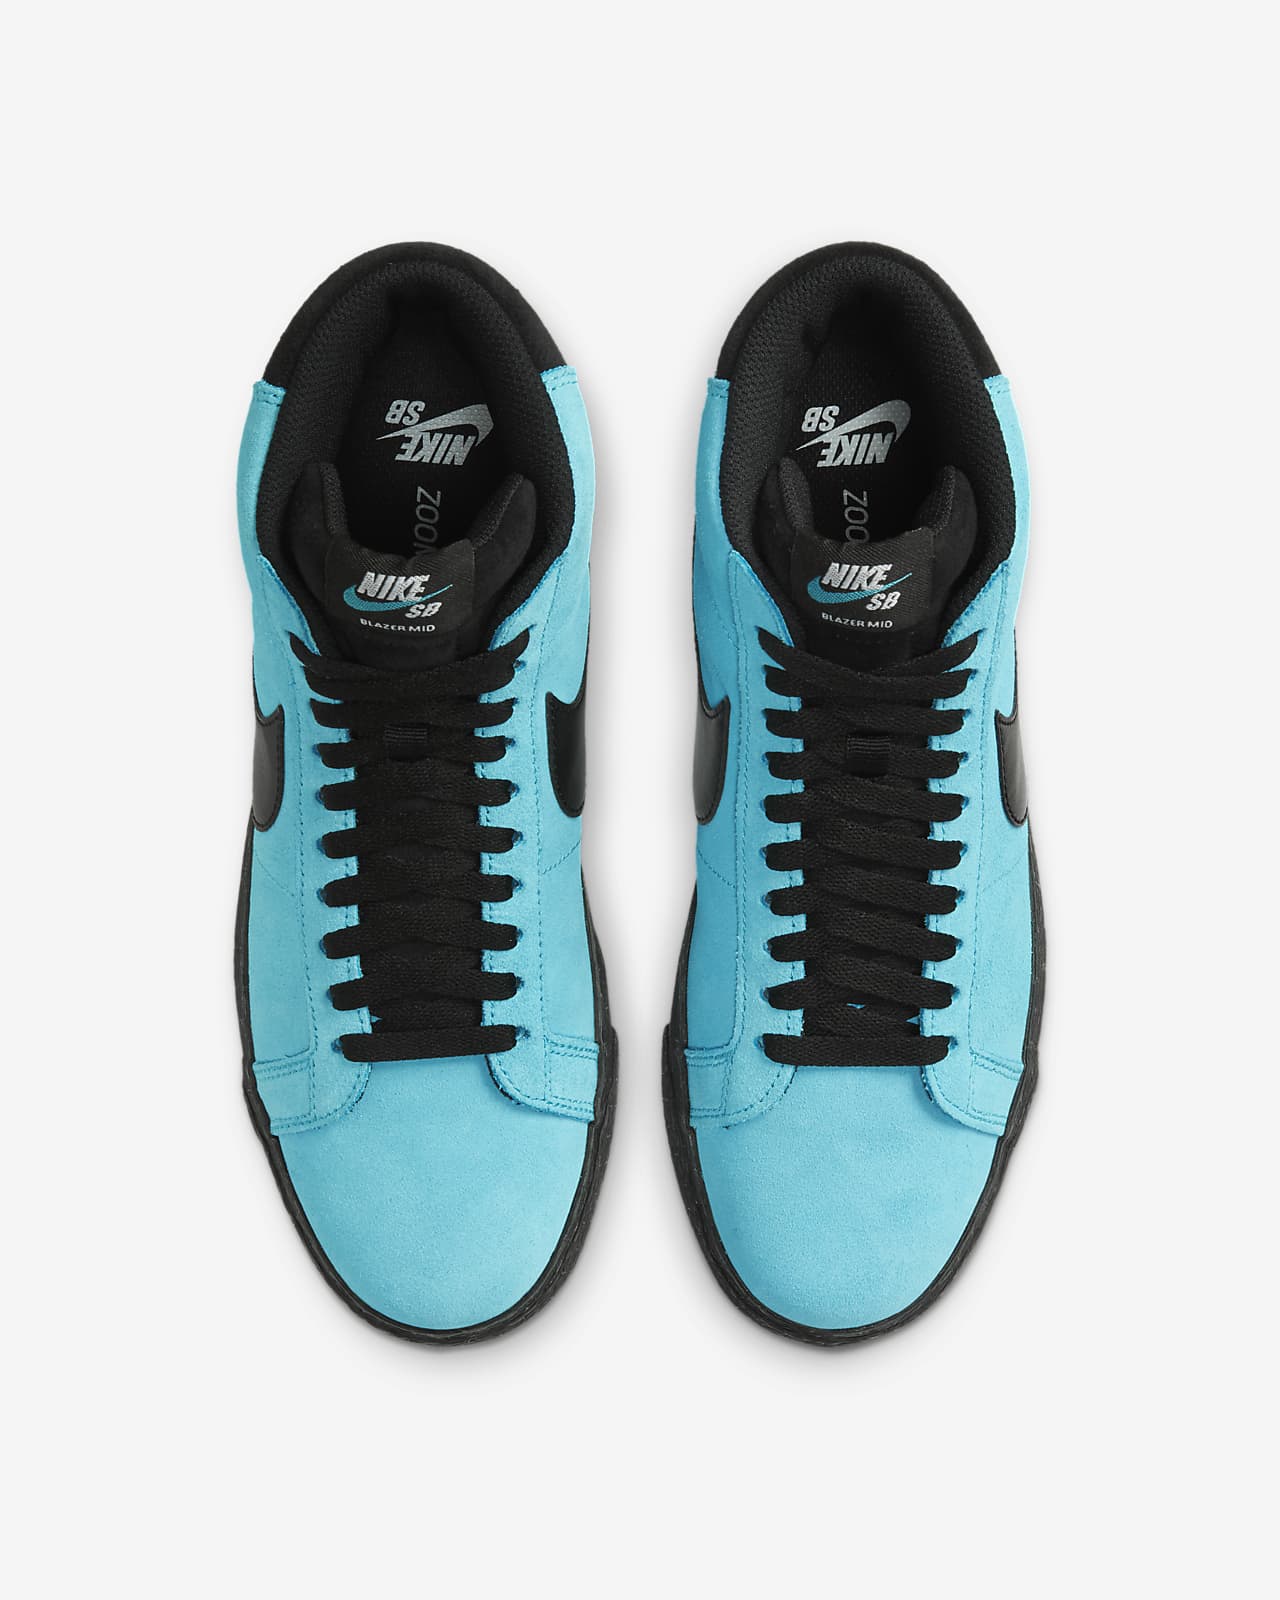 teal shoes nike